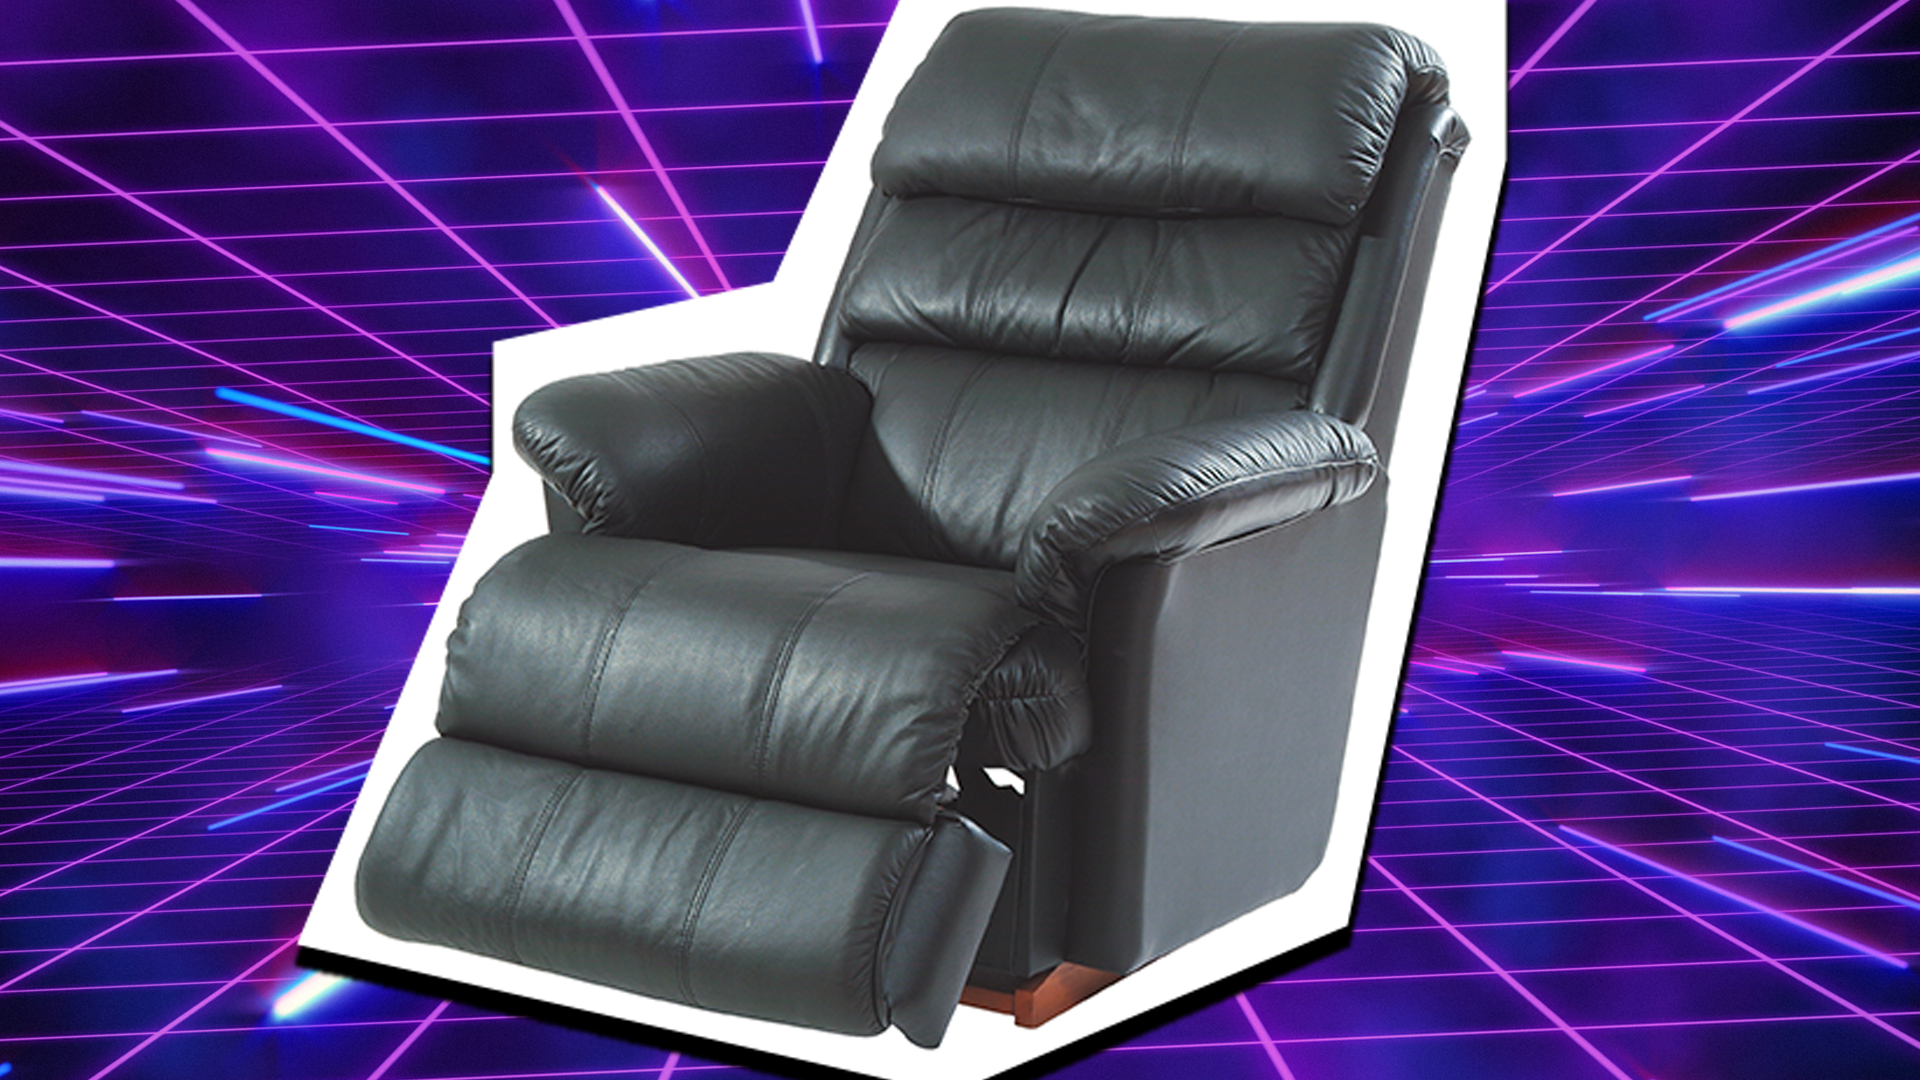 A chair on a laser background